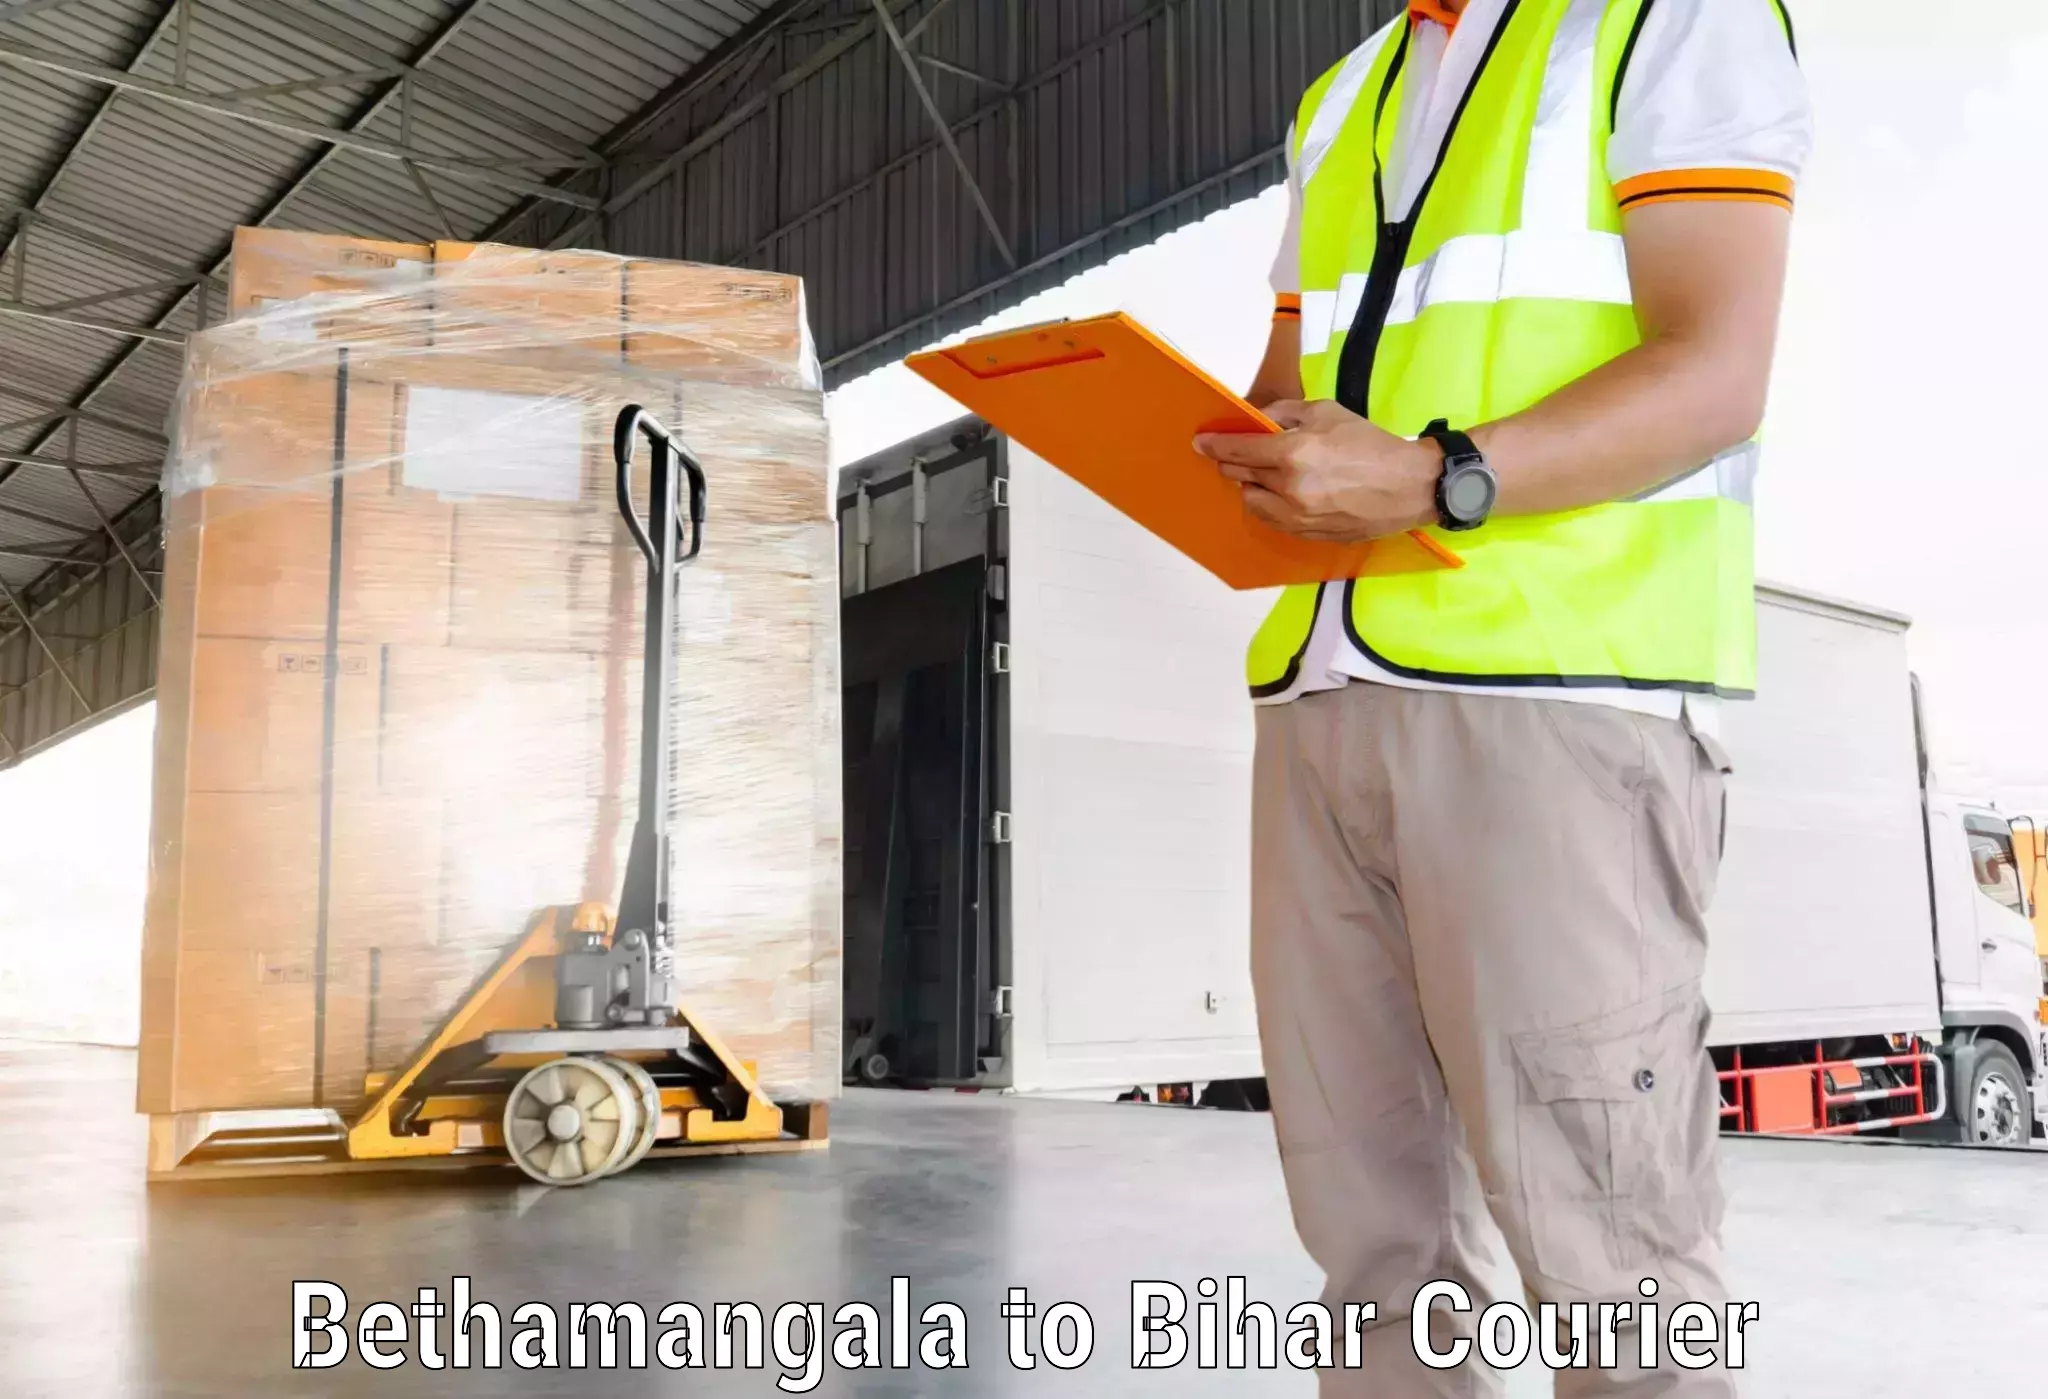 State-of-the-art courier technology Bethamangala to Bhorey